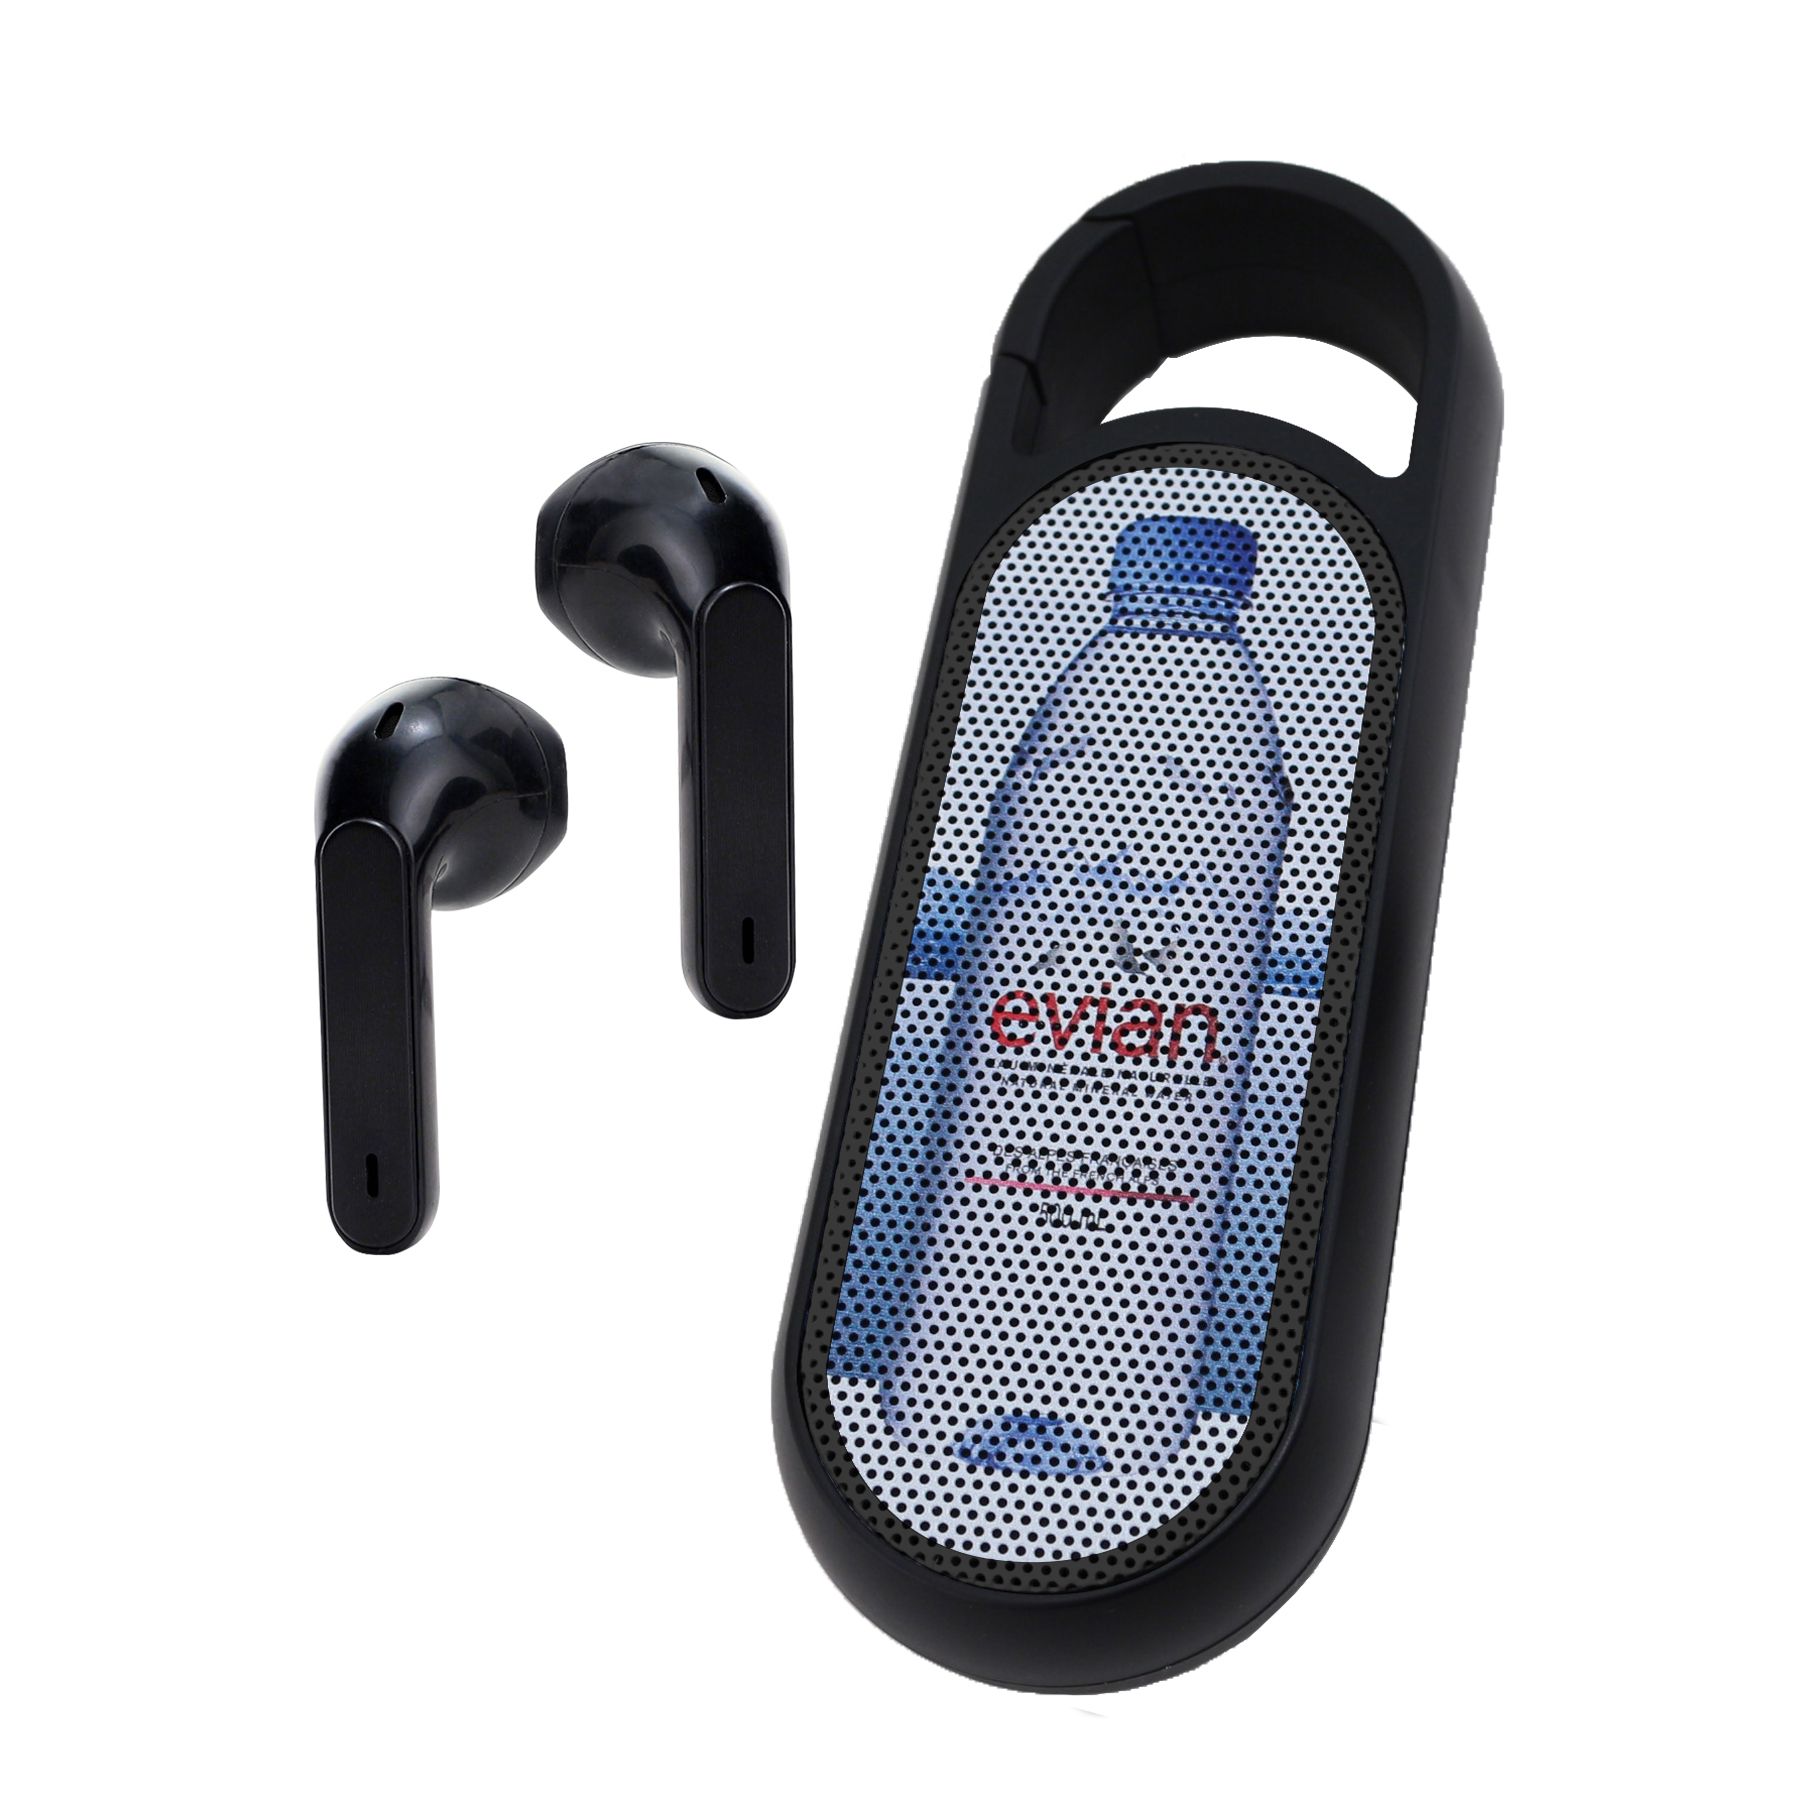 a small, black, pill shaped container with a water bottle and the words "evian" on the case. next to it are two black ear buds. 